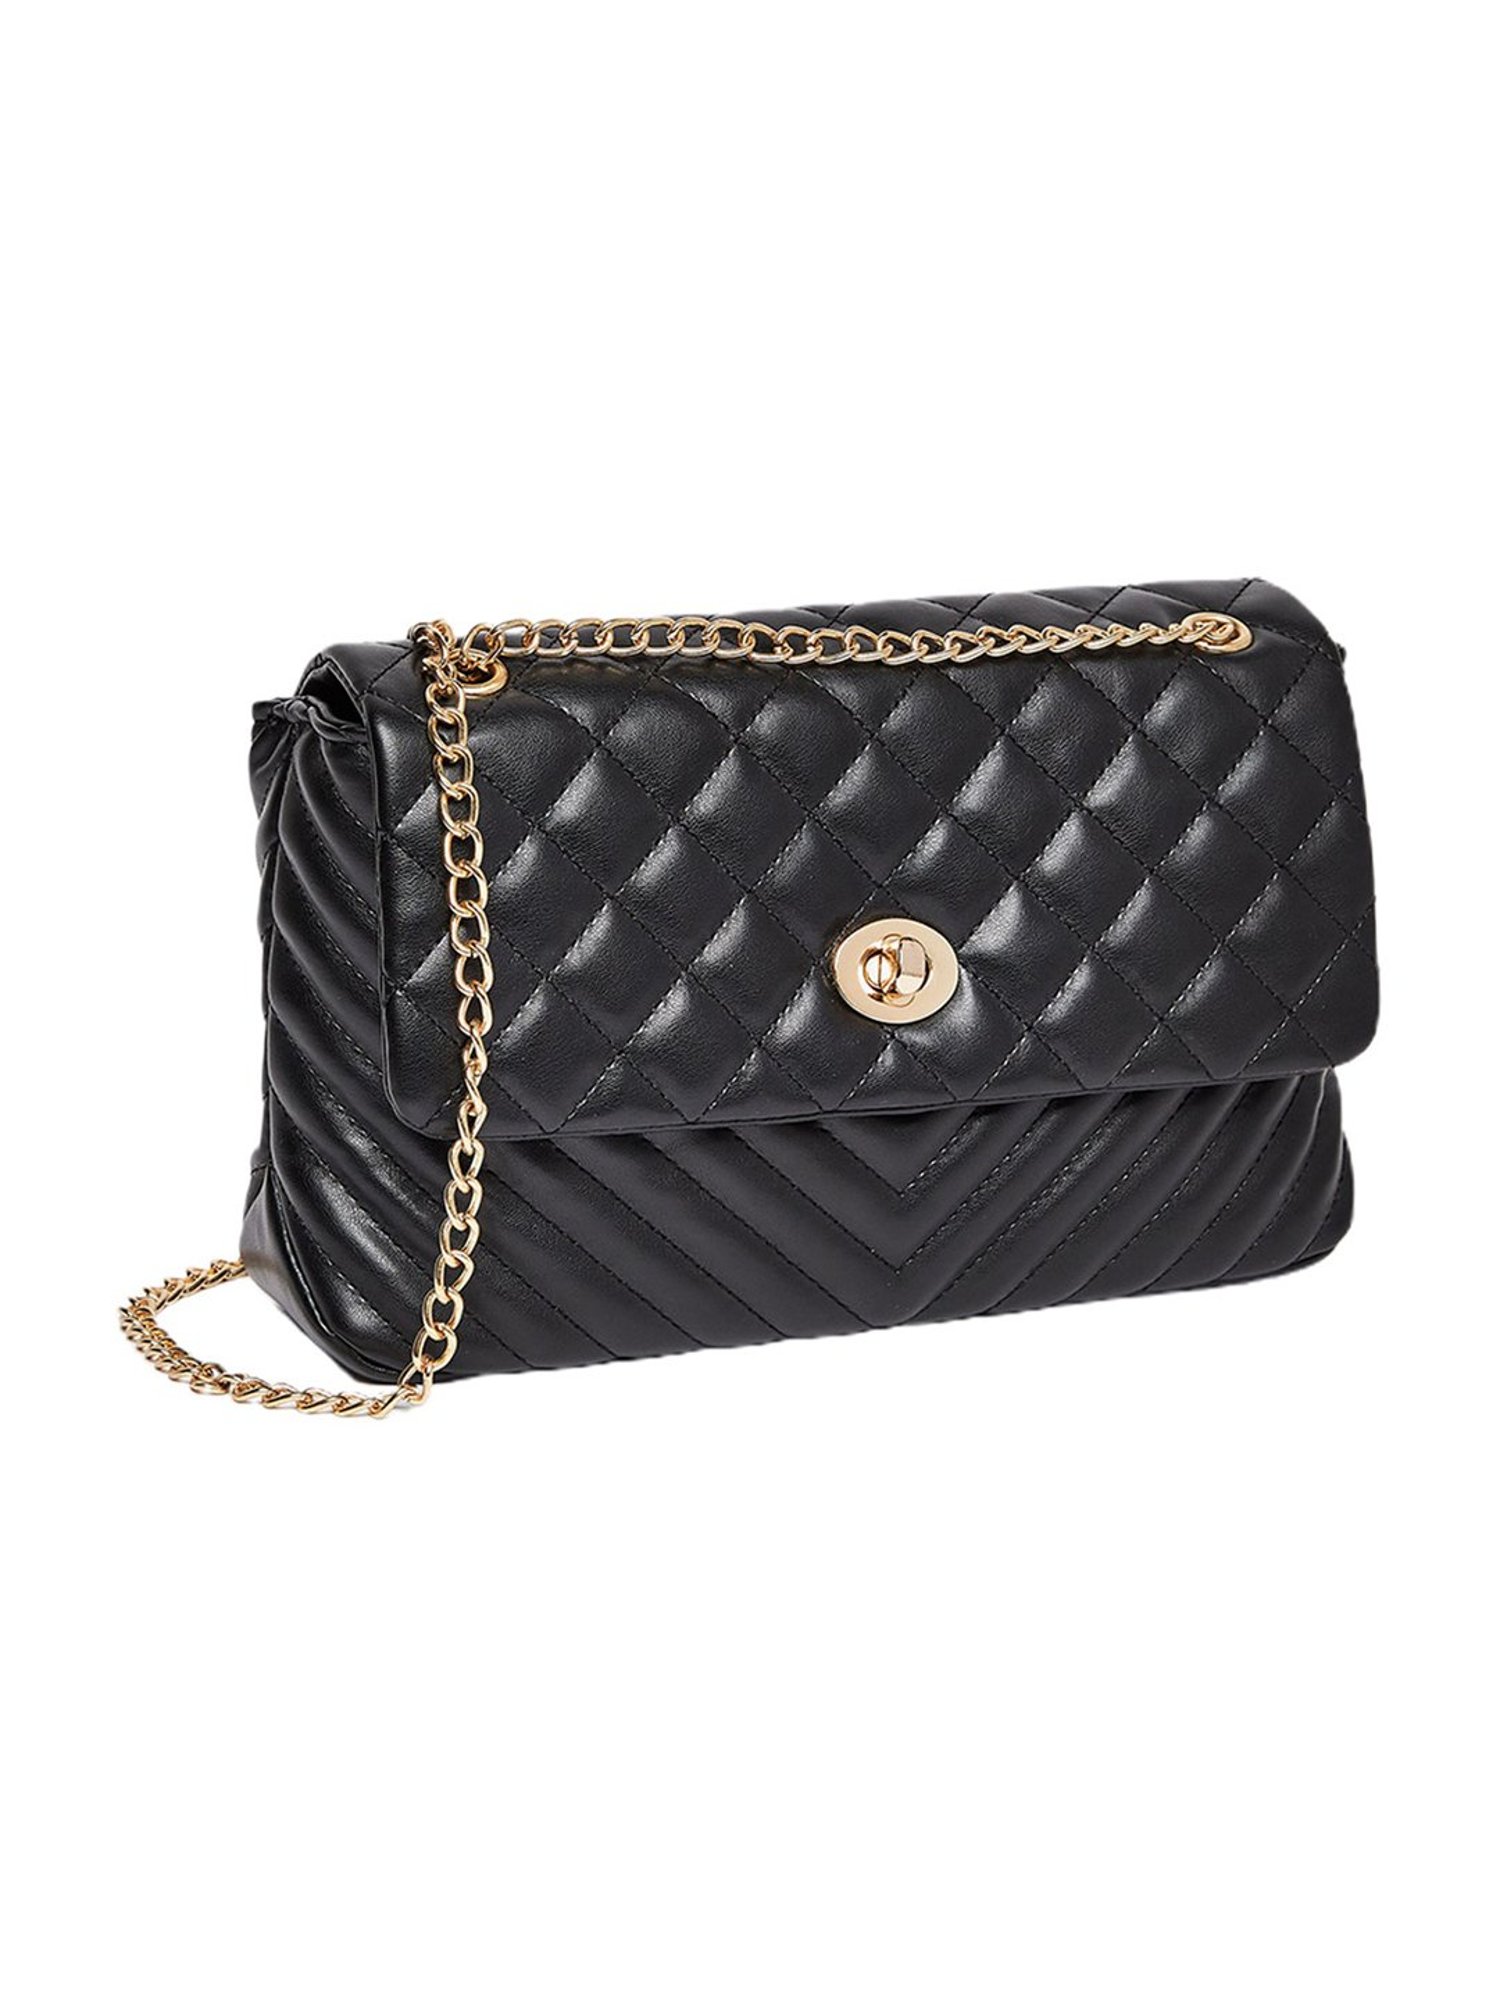 Quilted Shoulder Bags for Women Designer Black Chain Purse Small Classic Leather  Crossbody Clutch Handbag 